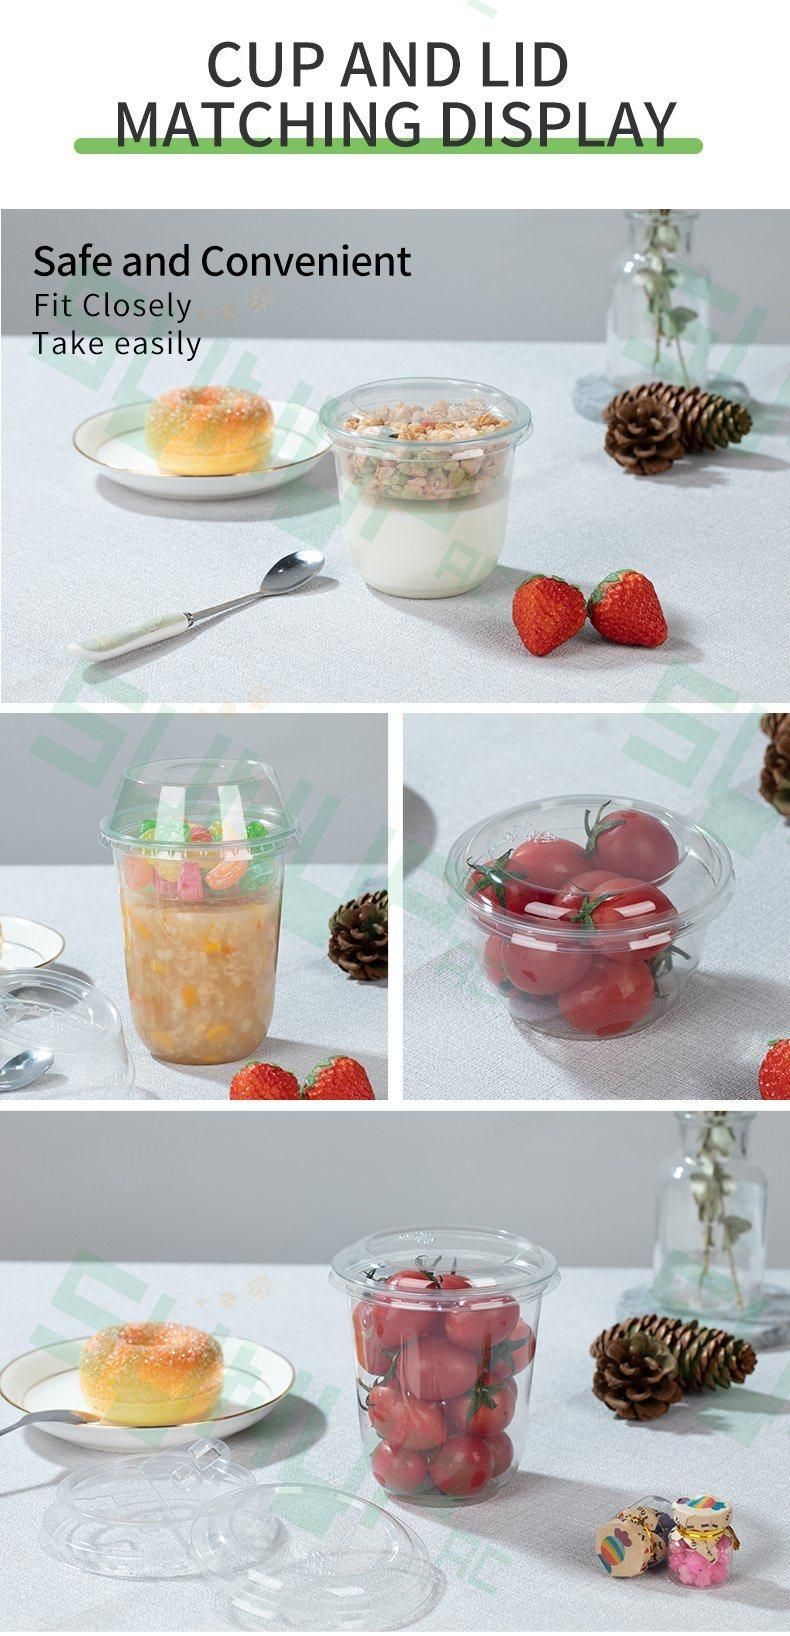 High Quality U Shape Pet Disposable Yoghurt Cup 360ml with Dome and Flat Cover